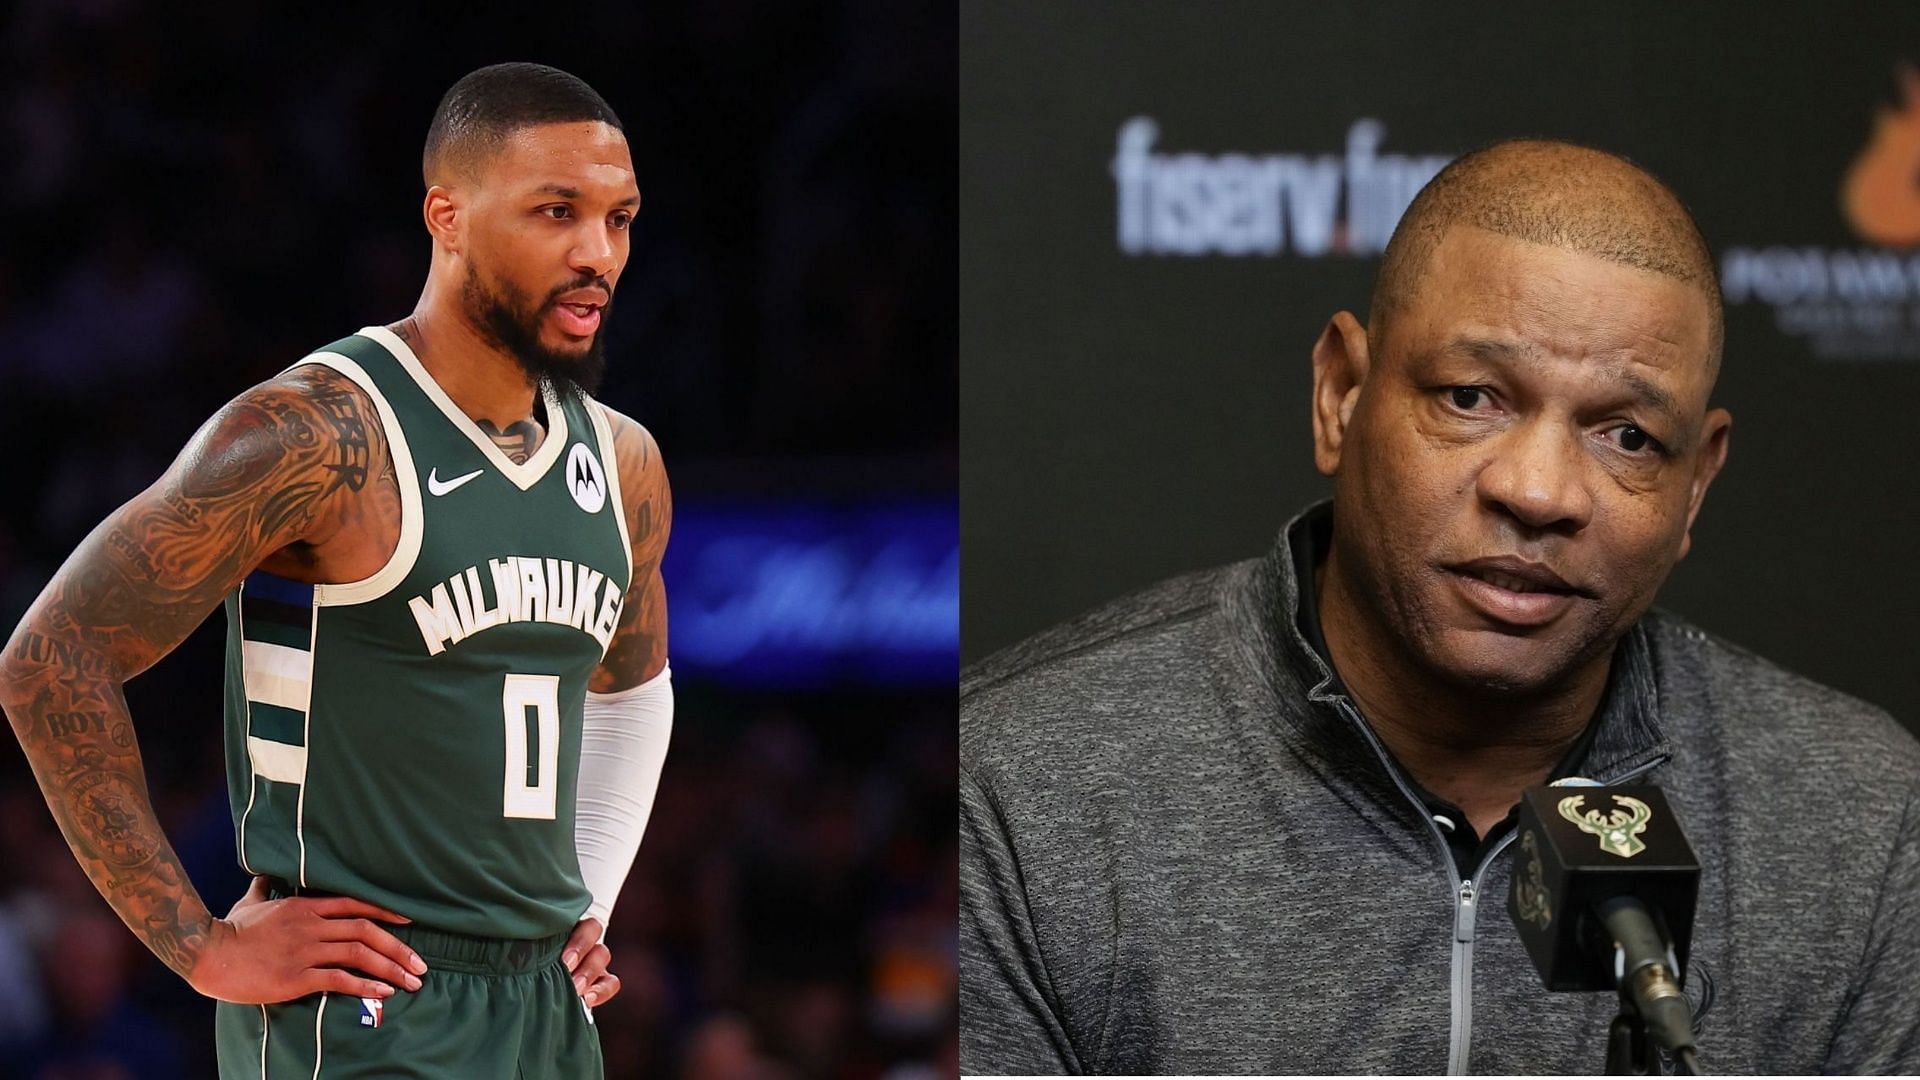 Damian Lillard shows faith in Doc Rivers, citing his history as a player and a coach for his trust